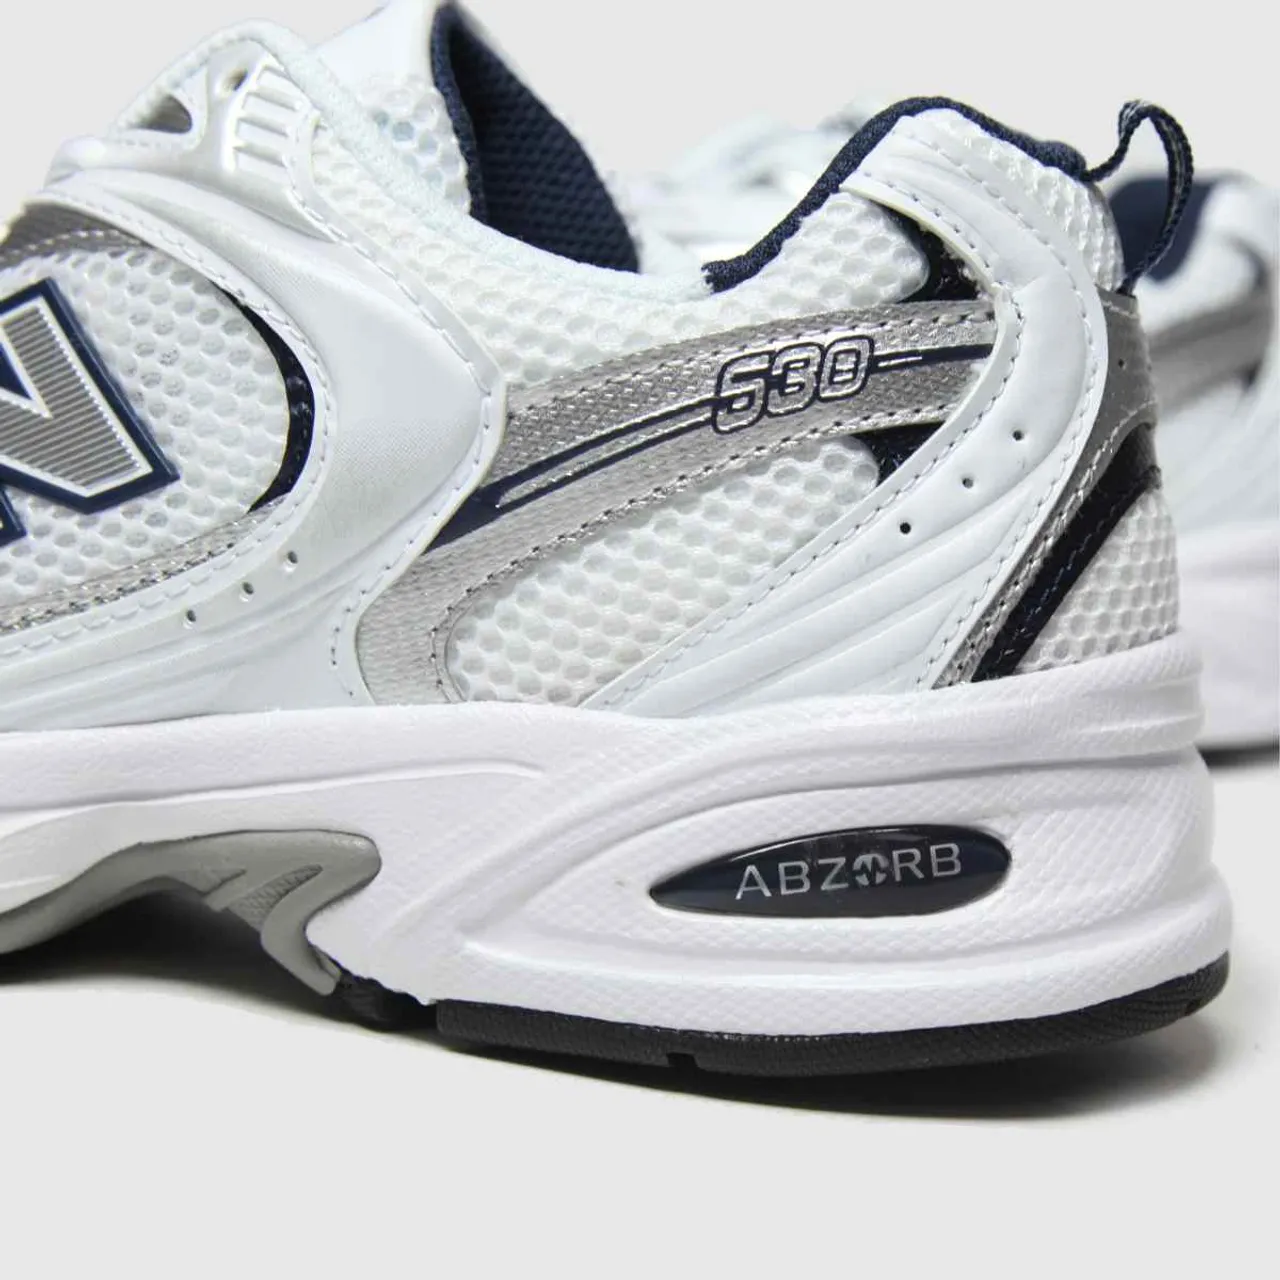 New Balance 530 Trainers In White & Silver